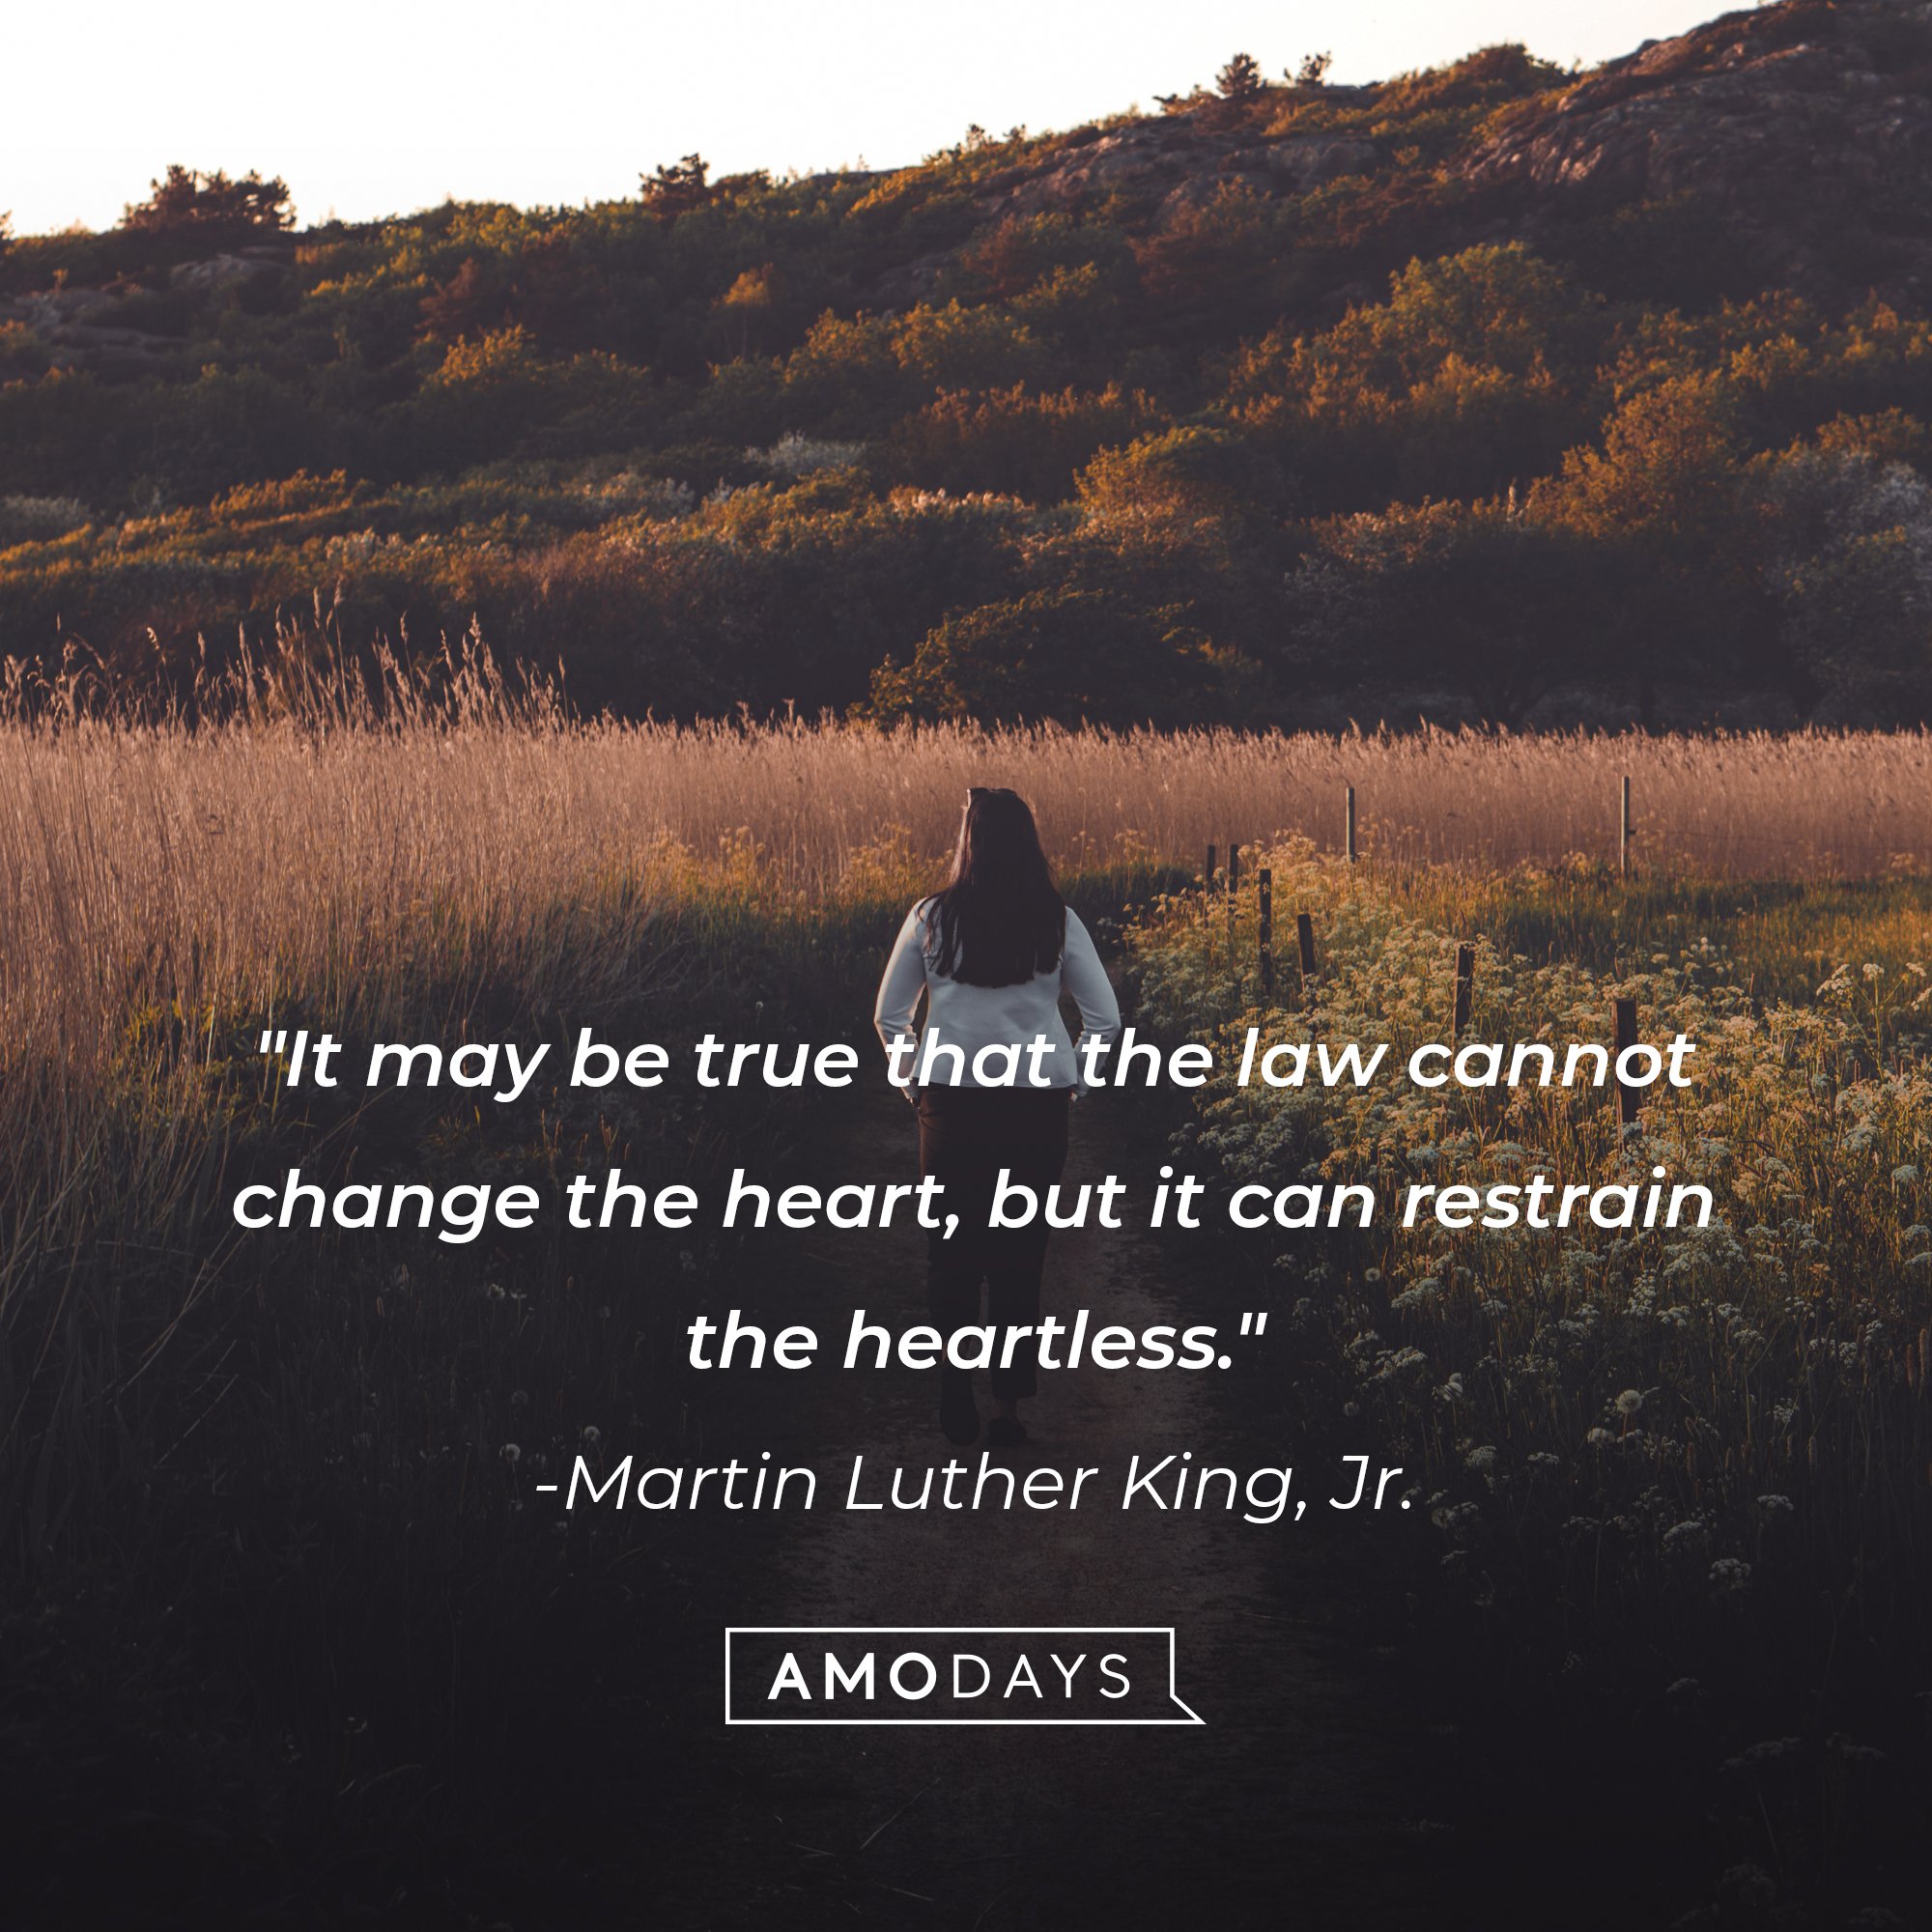 Martin Luther King, Jr.'s quote: "It may be true that the law cannot change the heart, but it can restrain the heartless." | Image: AmoDays